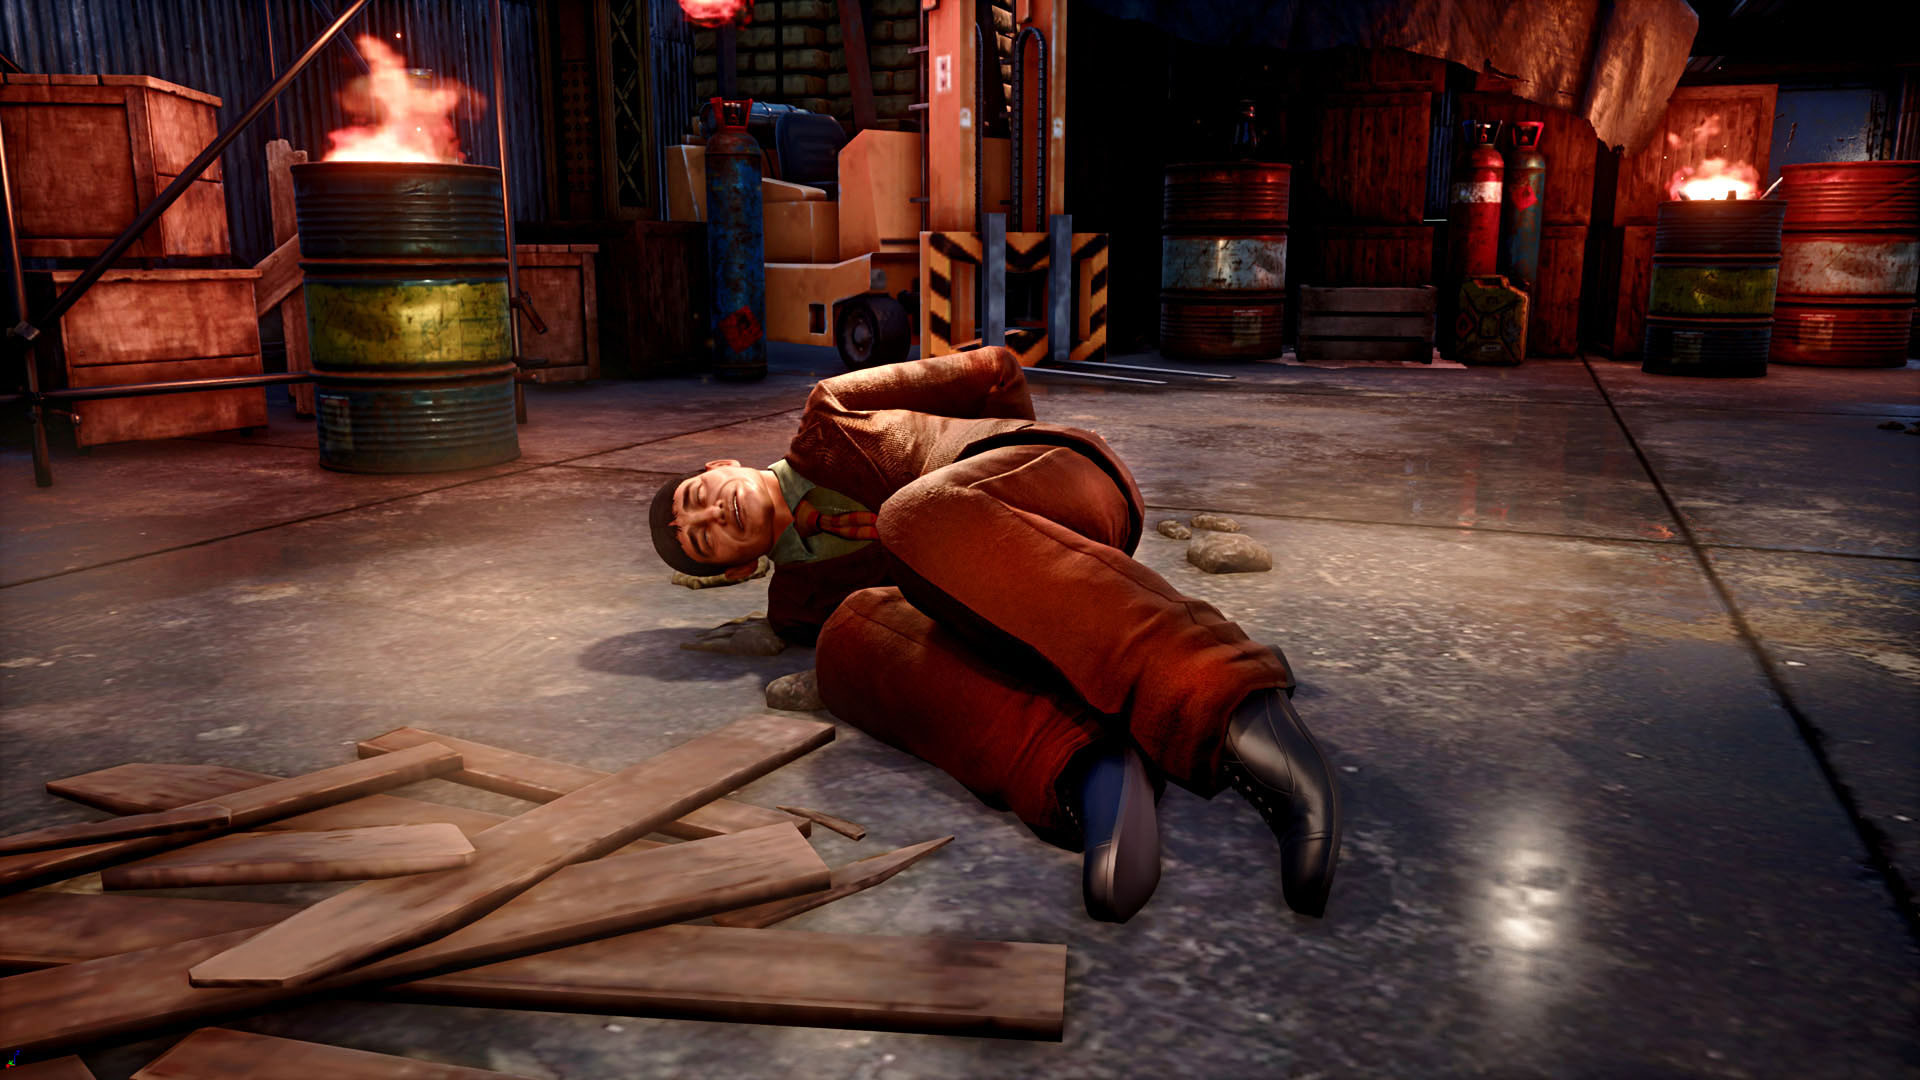 Shenmue III - DLC1 Story Quest Pack Featured Screenshot #1